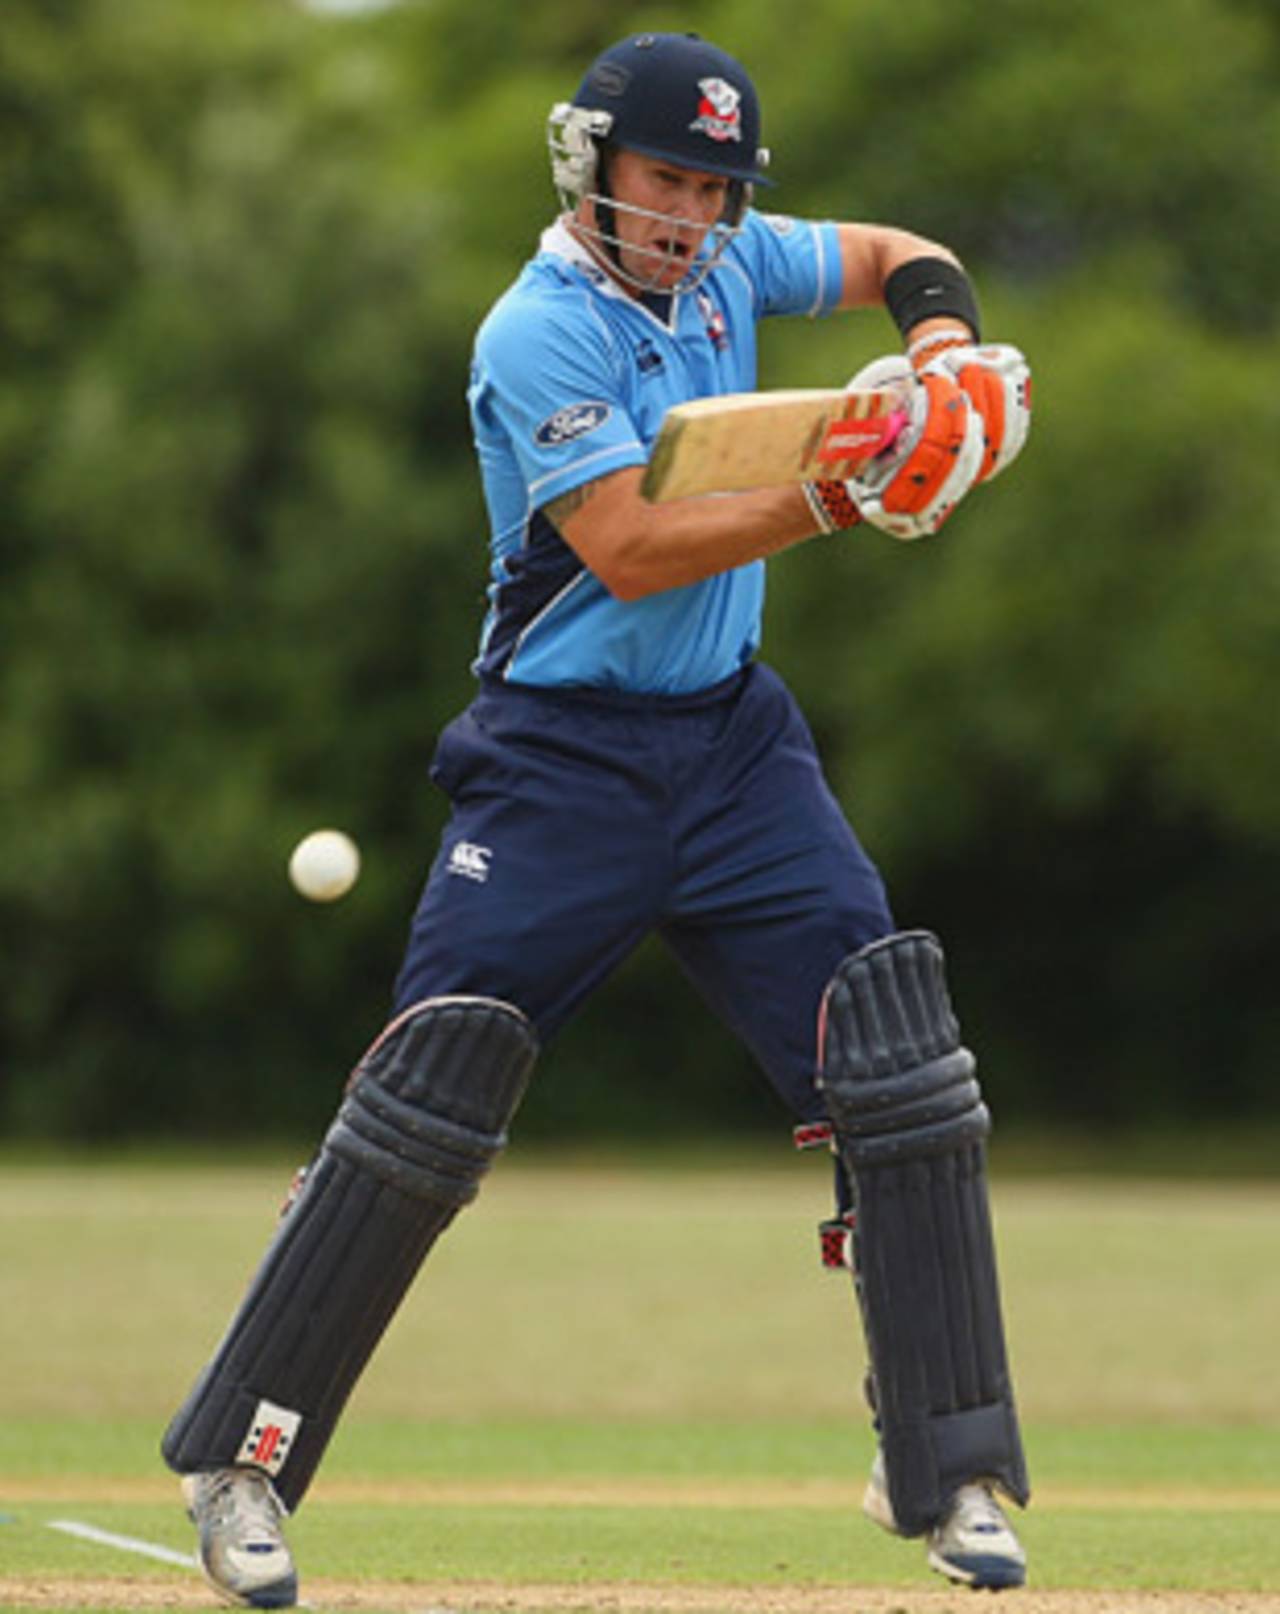 Reece Young plays the square cut during his 40, Auckland v Otago, New Zealand Cricket One Day Competition, Auckland, December 17, 2009